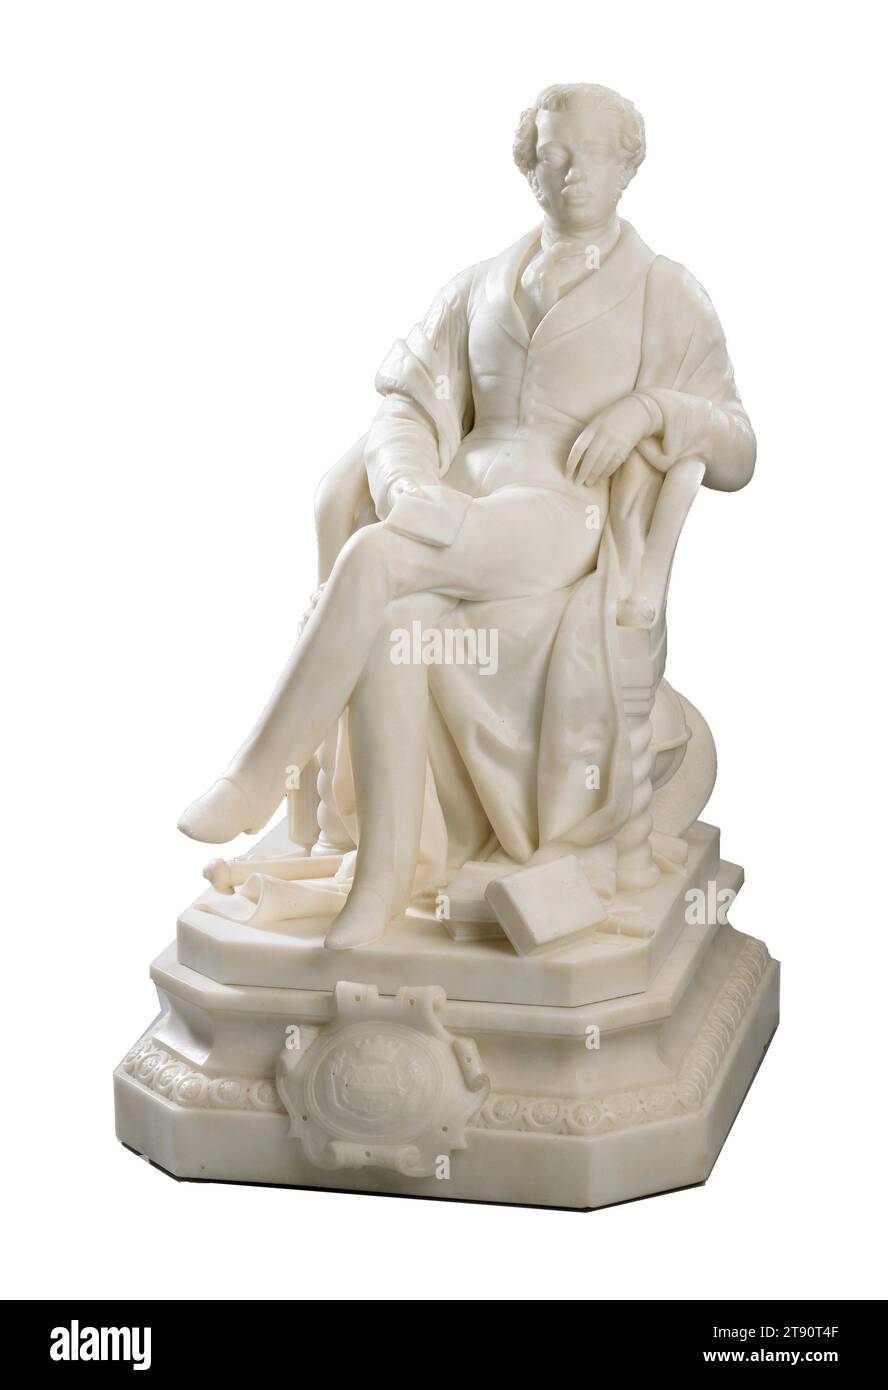 Prince Anatole Demidoff, 1839, Jean-Pierre Dantan II, French, 1800 - 1869, 19 x 11 x 13 in. (48.26 x 27.94 x 33.02 cm), Marble, France, 19th century, Anatole Demidoff, Prince of San Donato (1812-70), was one of the foremost art collectors of the mid-19th century as well as a distinguished scientist and explorer. In this portrait by Jean-Pierre Dantan, Demidoff is shown with the attributes of his collecting -- a classically inspired ewer and basin -- and tools indicative of his scientific explorations -- a globe, telescope, compass, and maps. Stock Photo